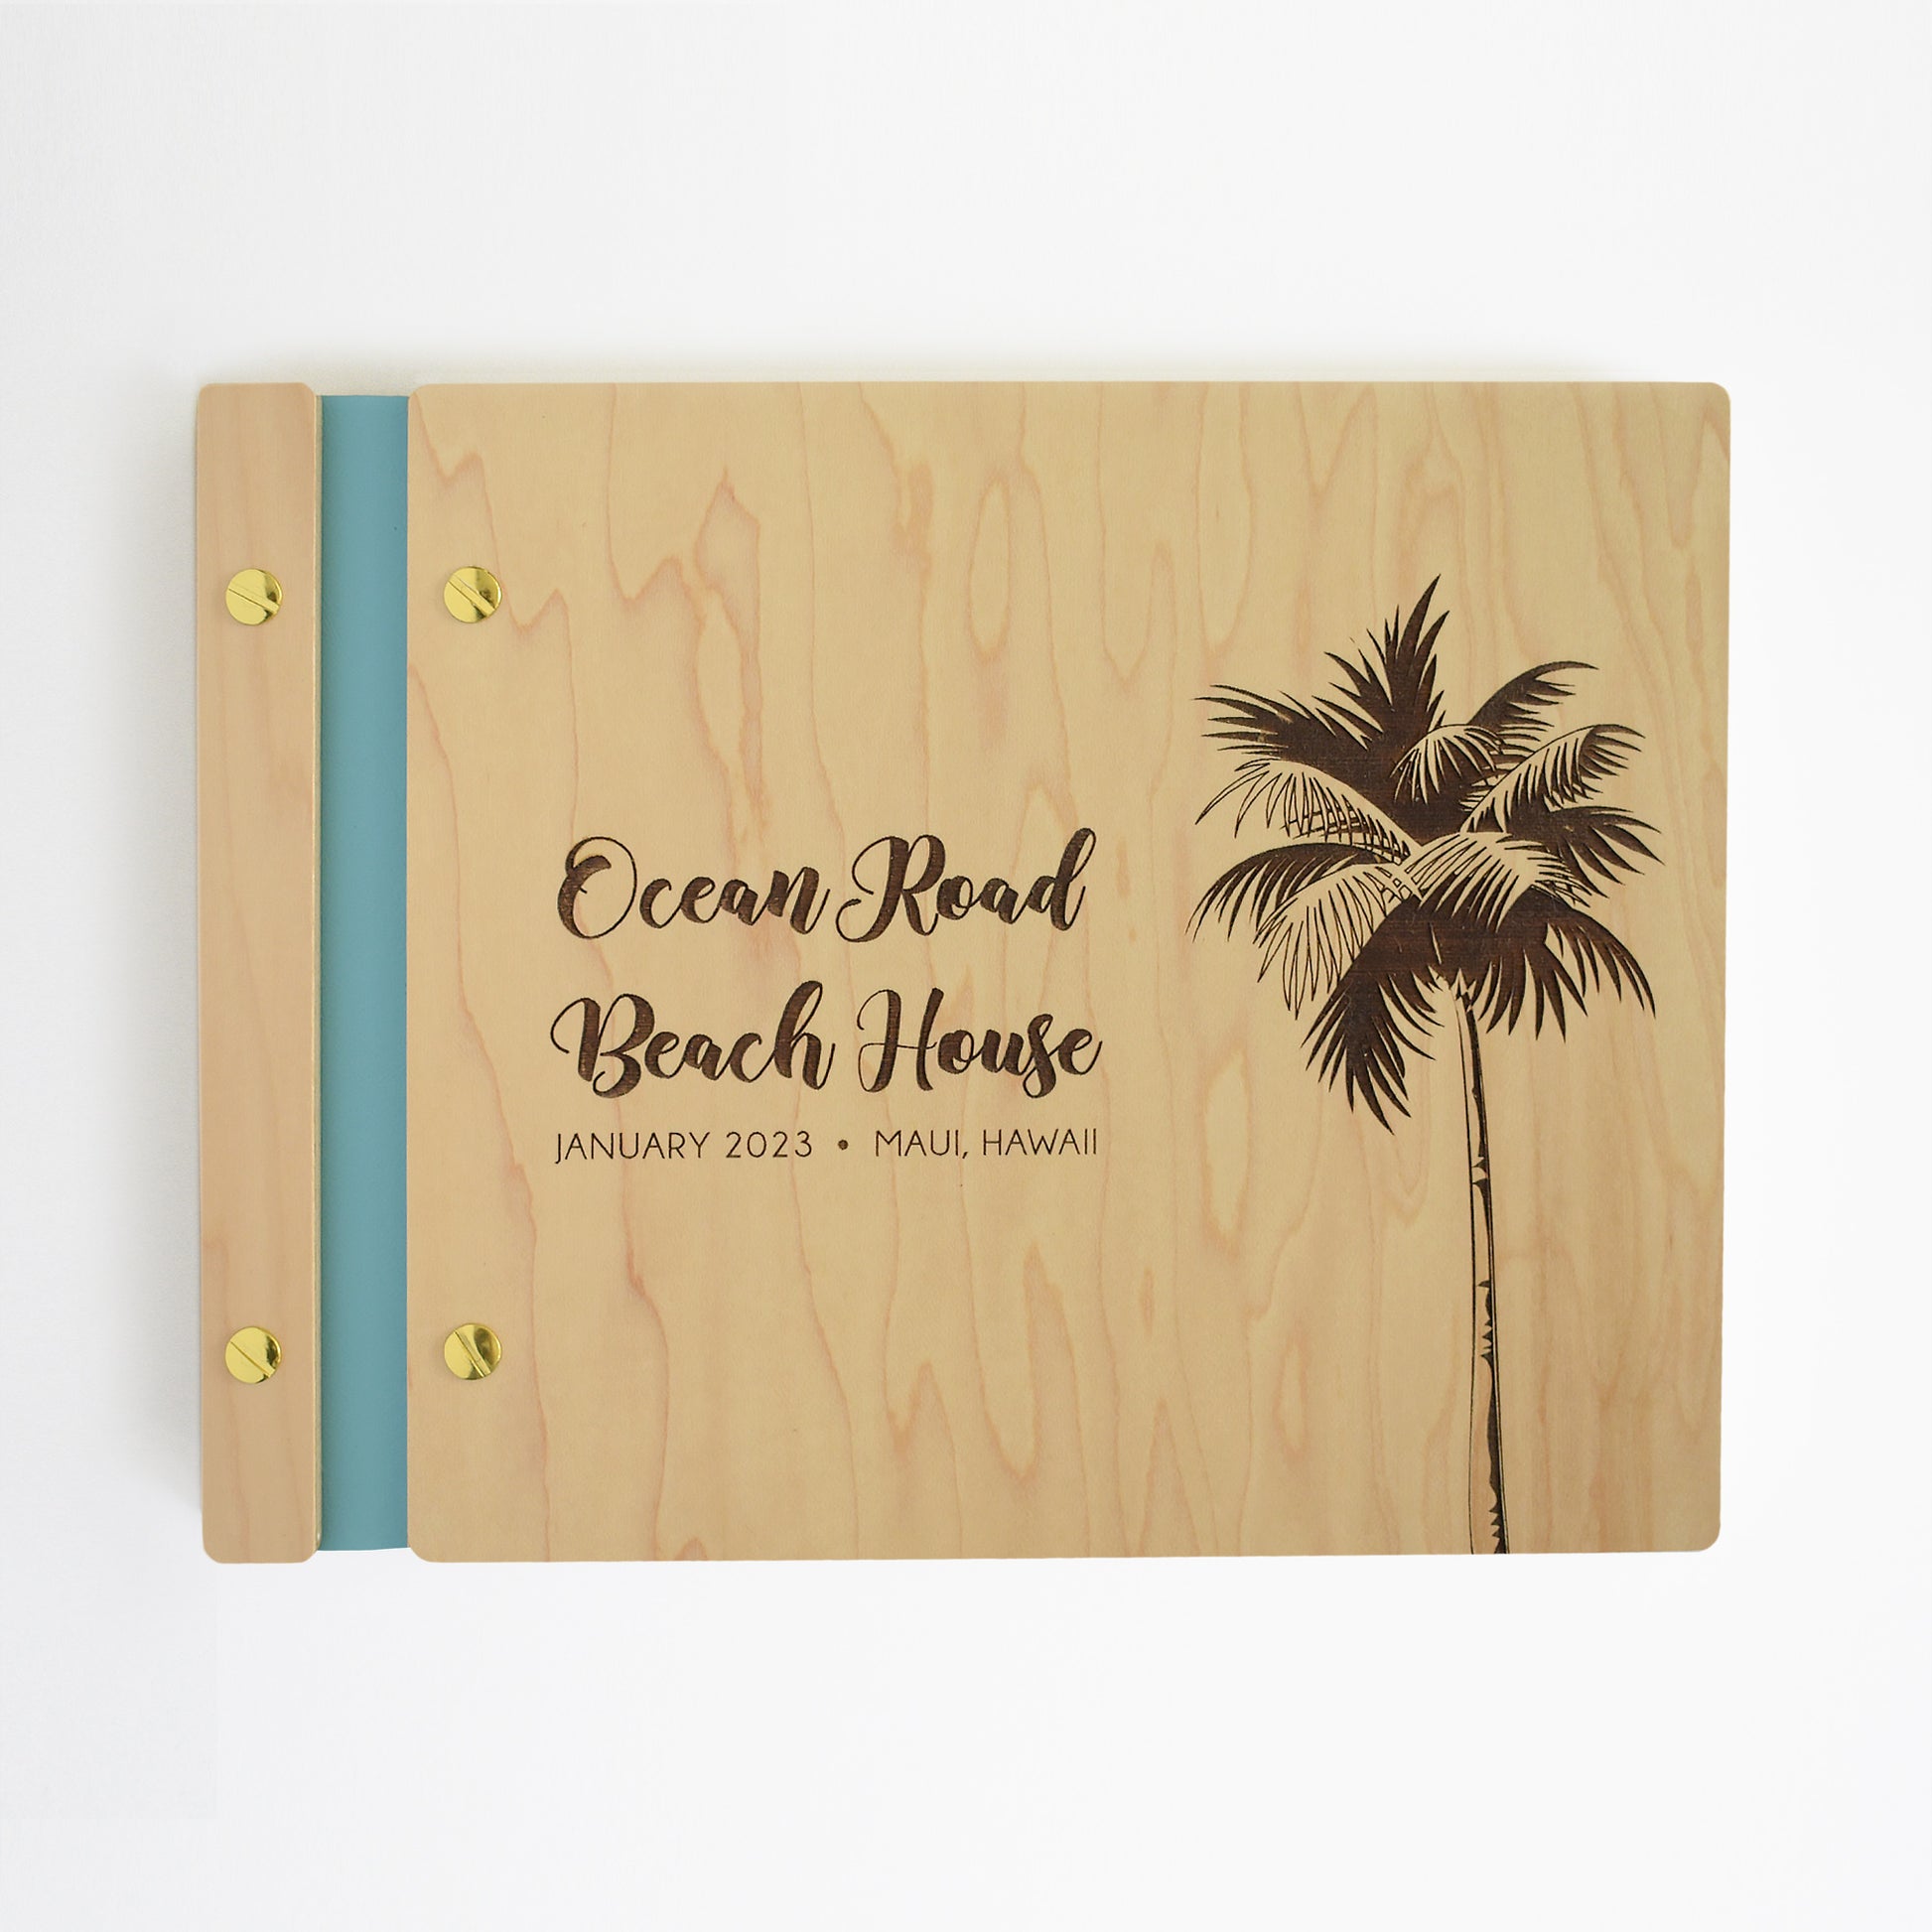 An 8.5x11" Airbnb guest book lies on a table. Made of maple wood, aqua vegan leather binding, and gold hardware. The front cover reads Ocean Road Beach House, January 2023, Maui, Hawaii.